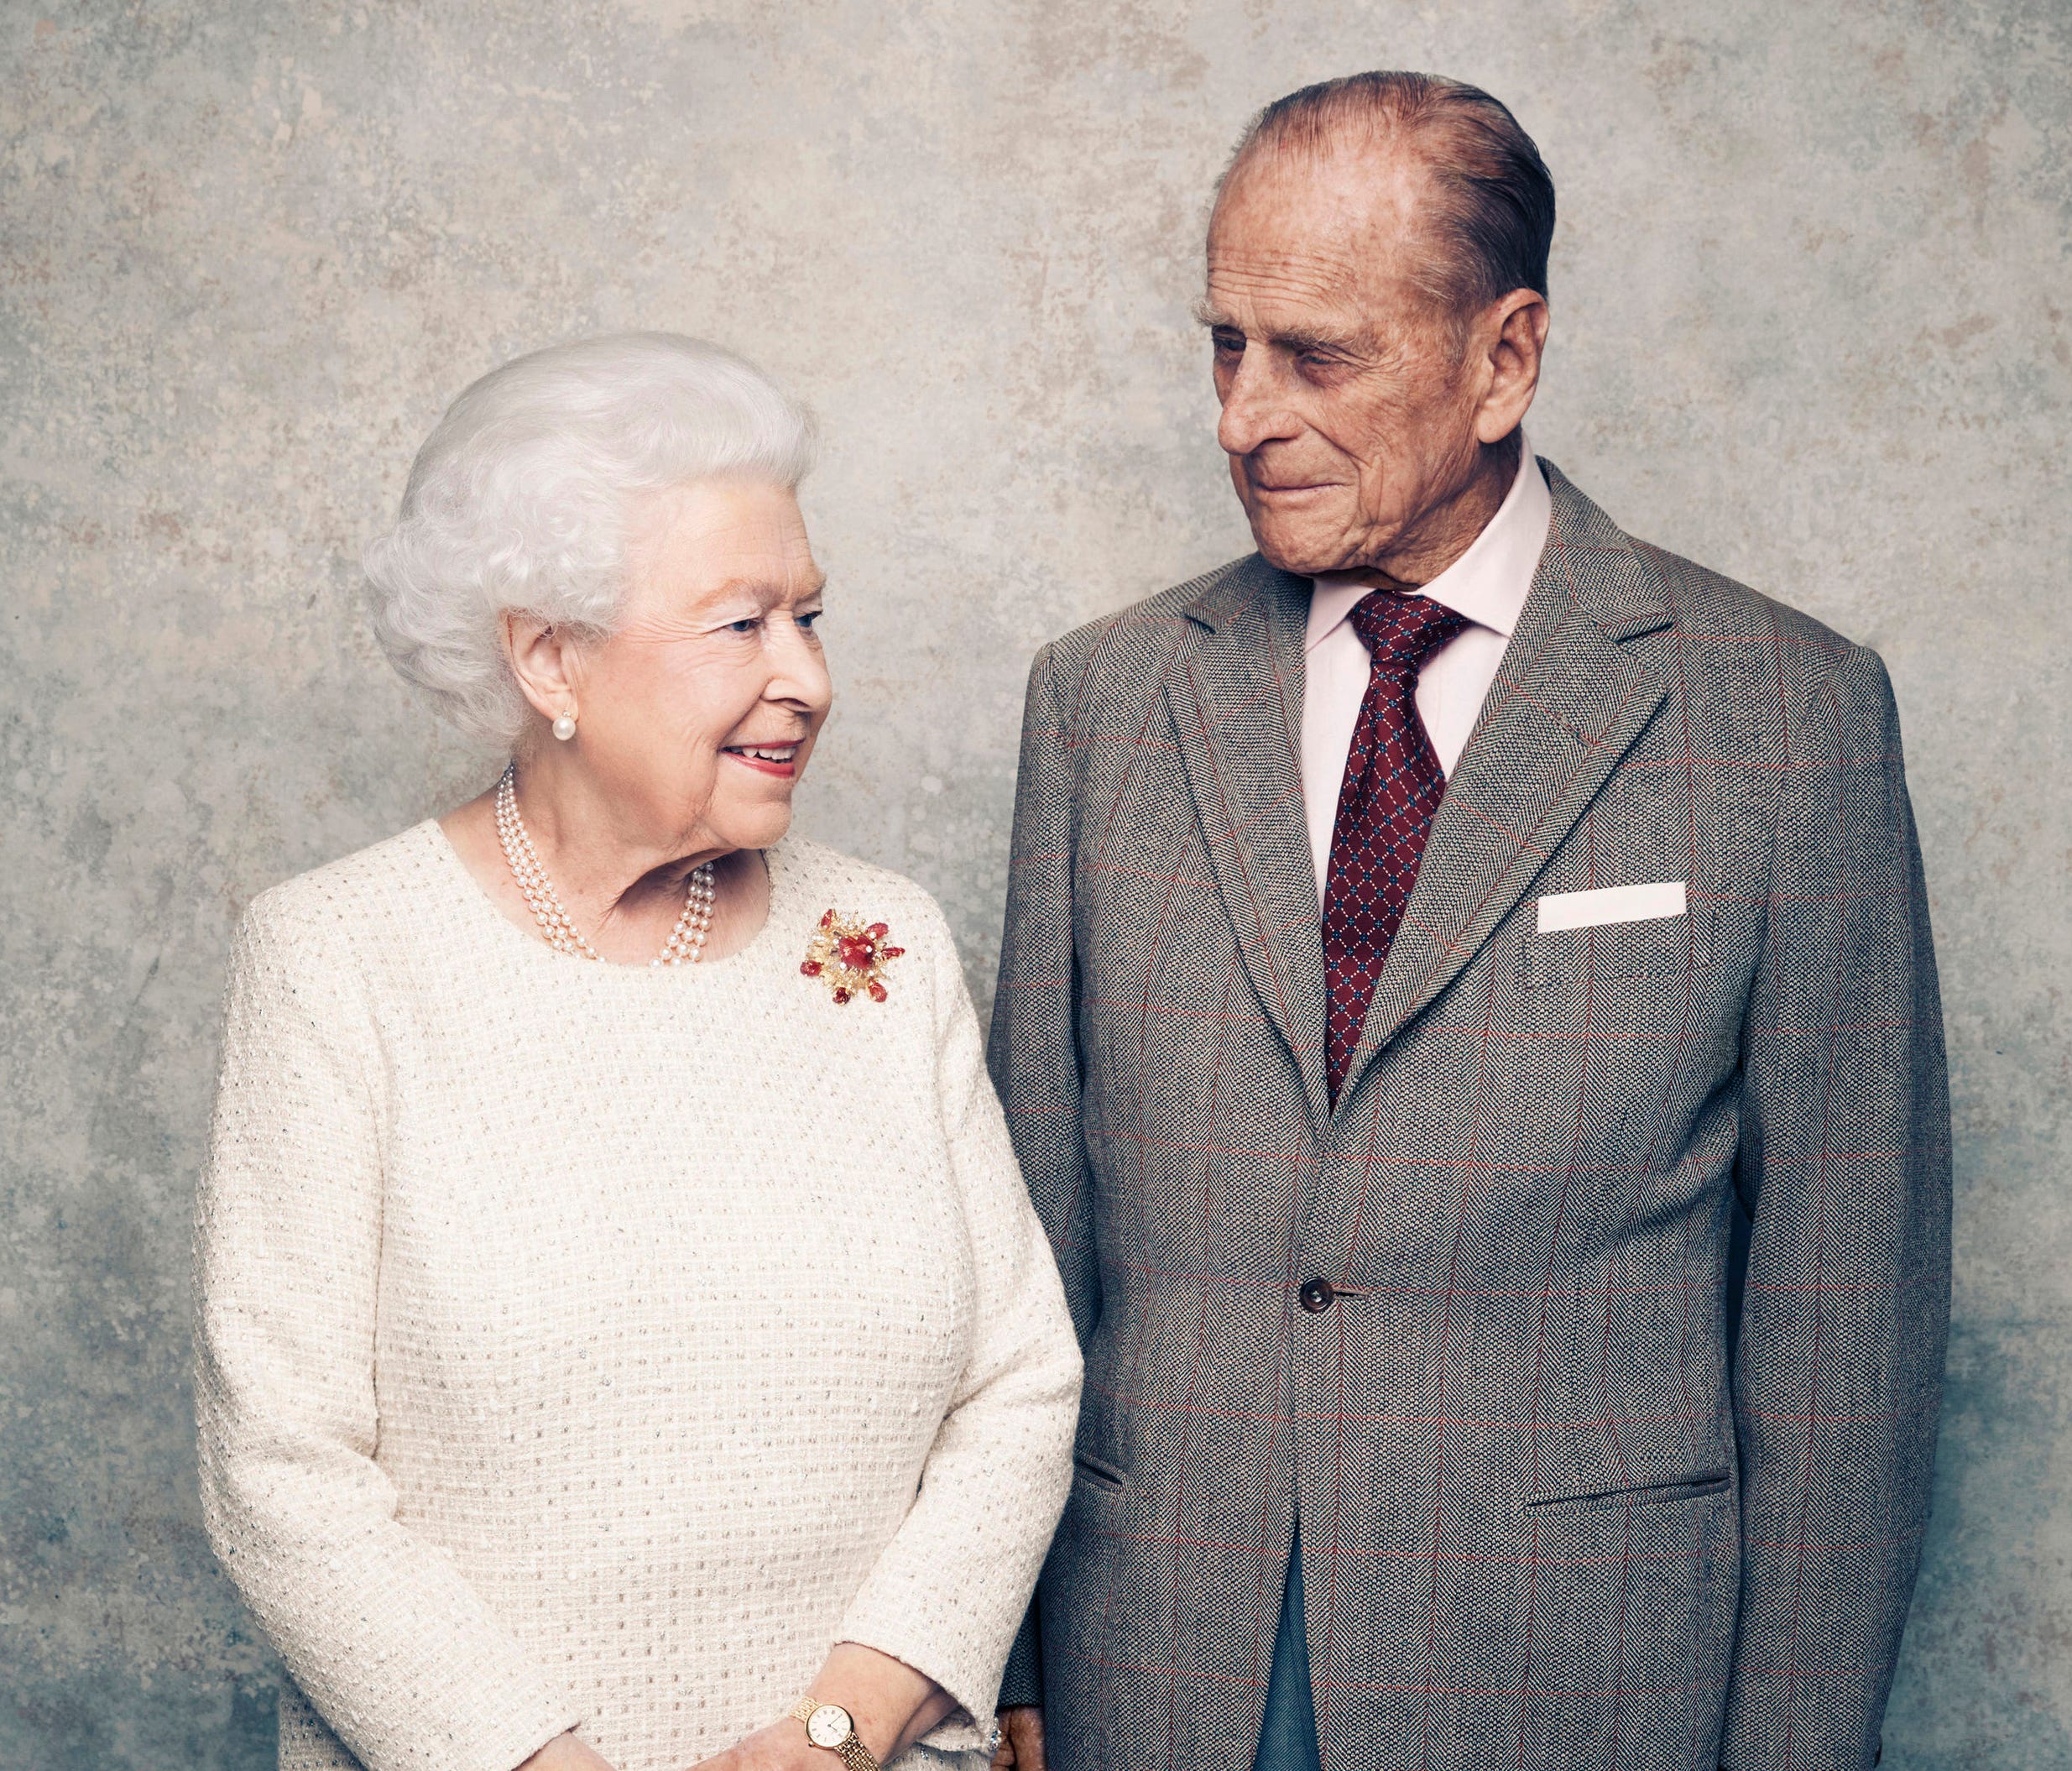 In this handout photo issued by Camera Press and taken in Nov. 2017, Britain's Queen Elizabeth and Prince Philip pose for a photograph in the White Drawing Room pictured against a platinum-textured backdrop at Windsor Castle, England.